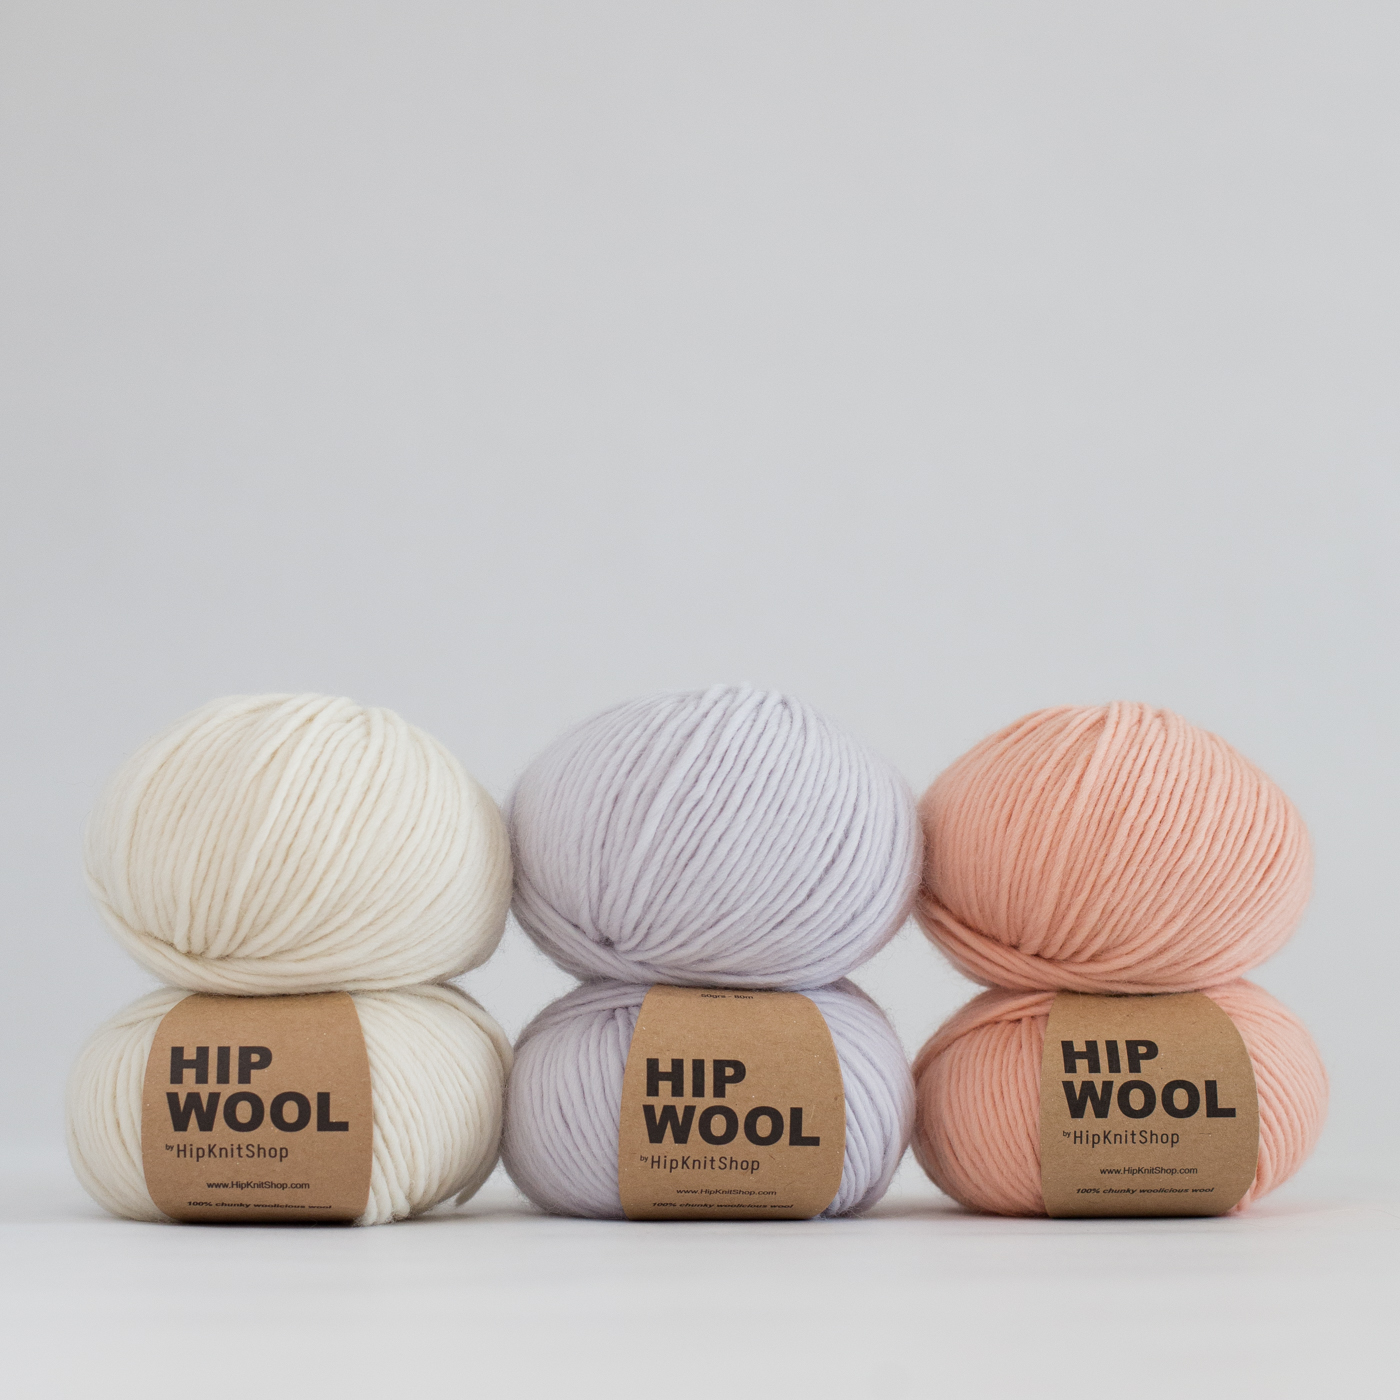 natural white wool yarn shop - Coconut white Hip Wool yarn | White yarn | Pure wool - by HipKnitShop - 09/09/2018